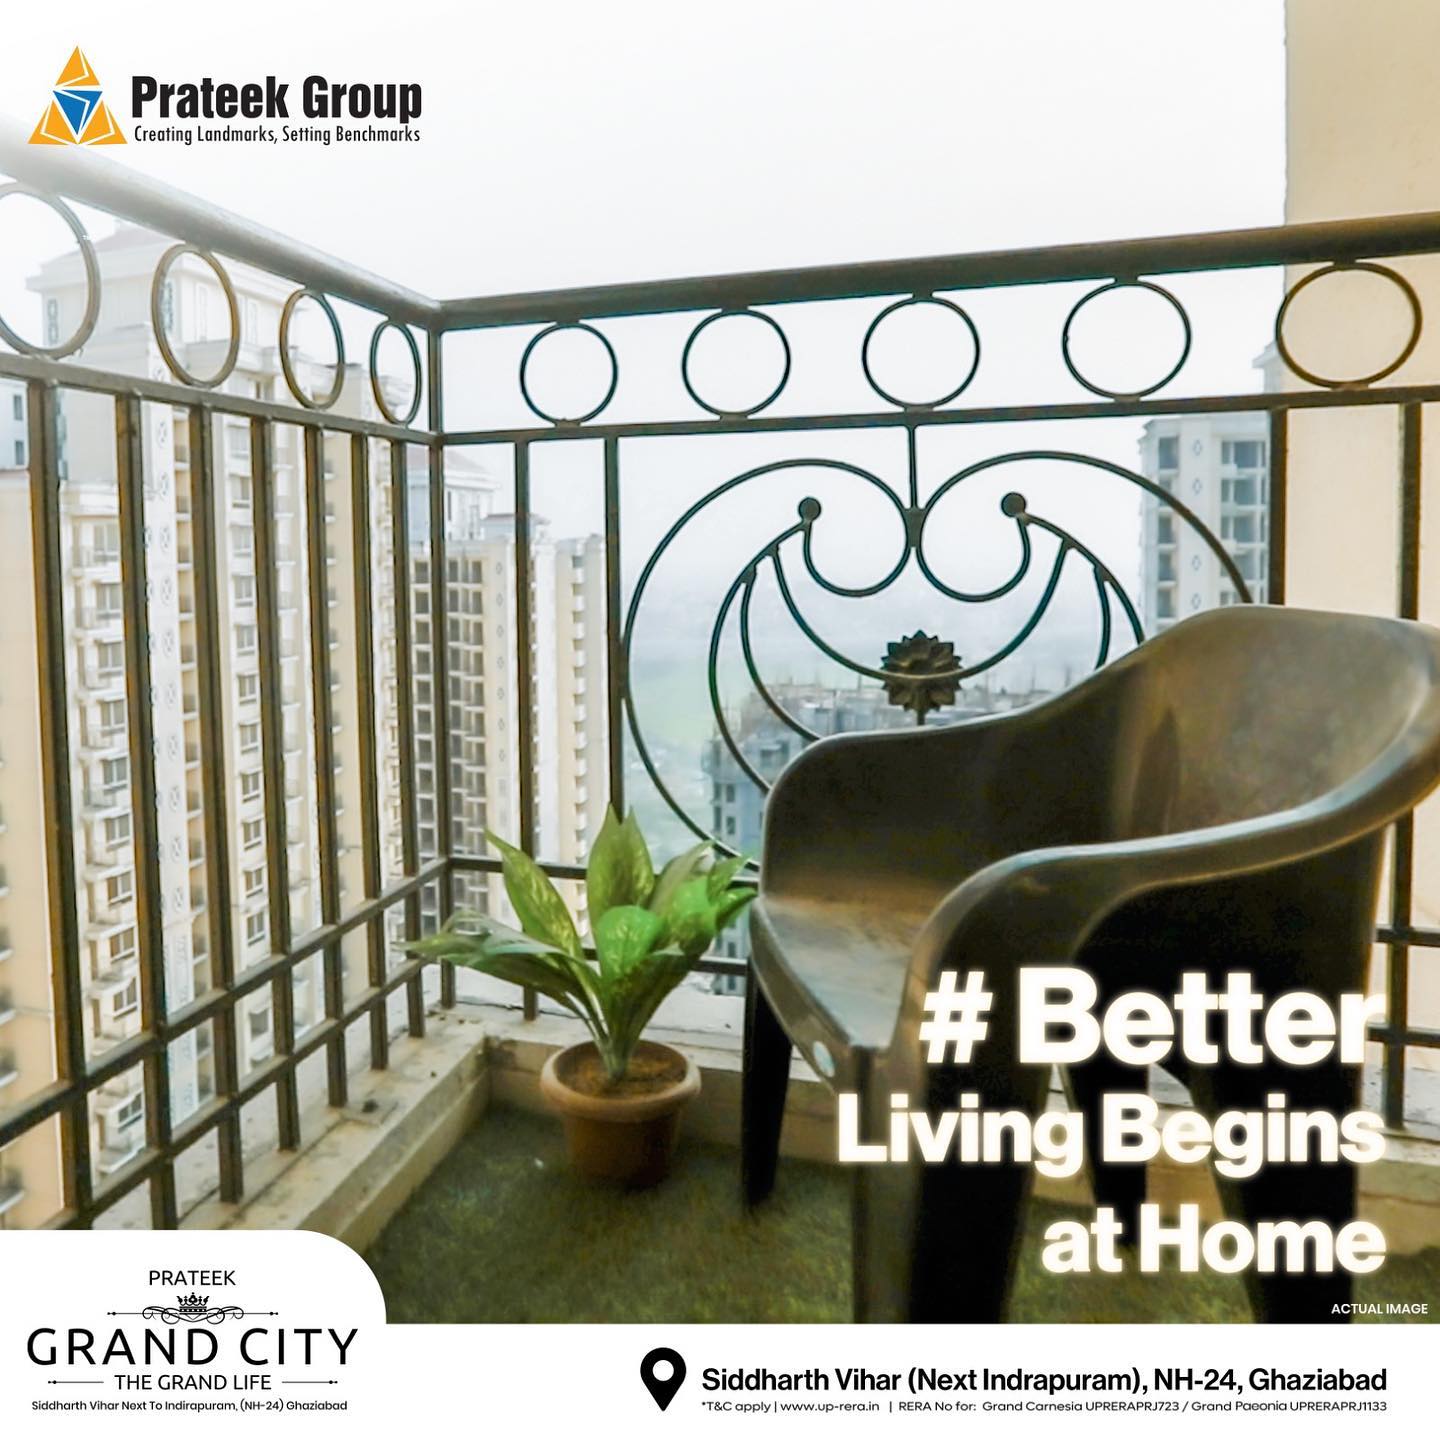 Prateek Grand City surrounded by fresh air yet close to Delhi Update